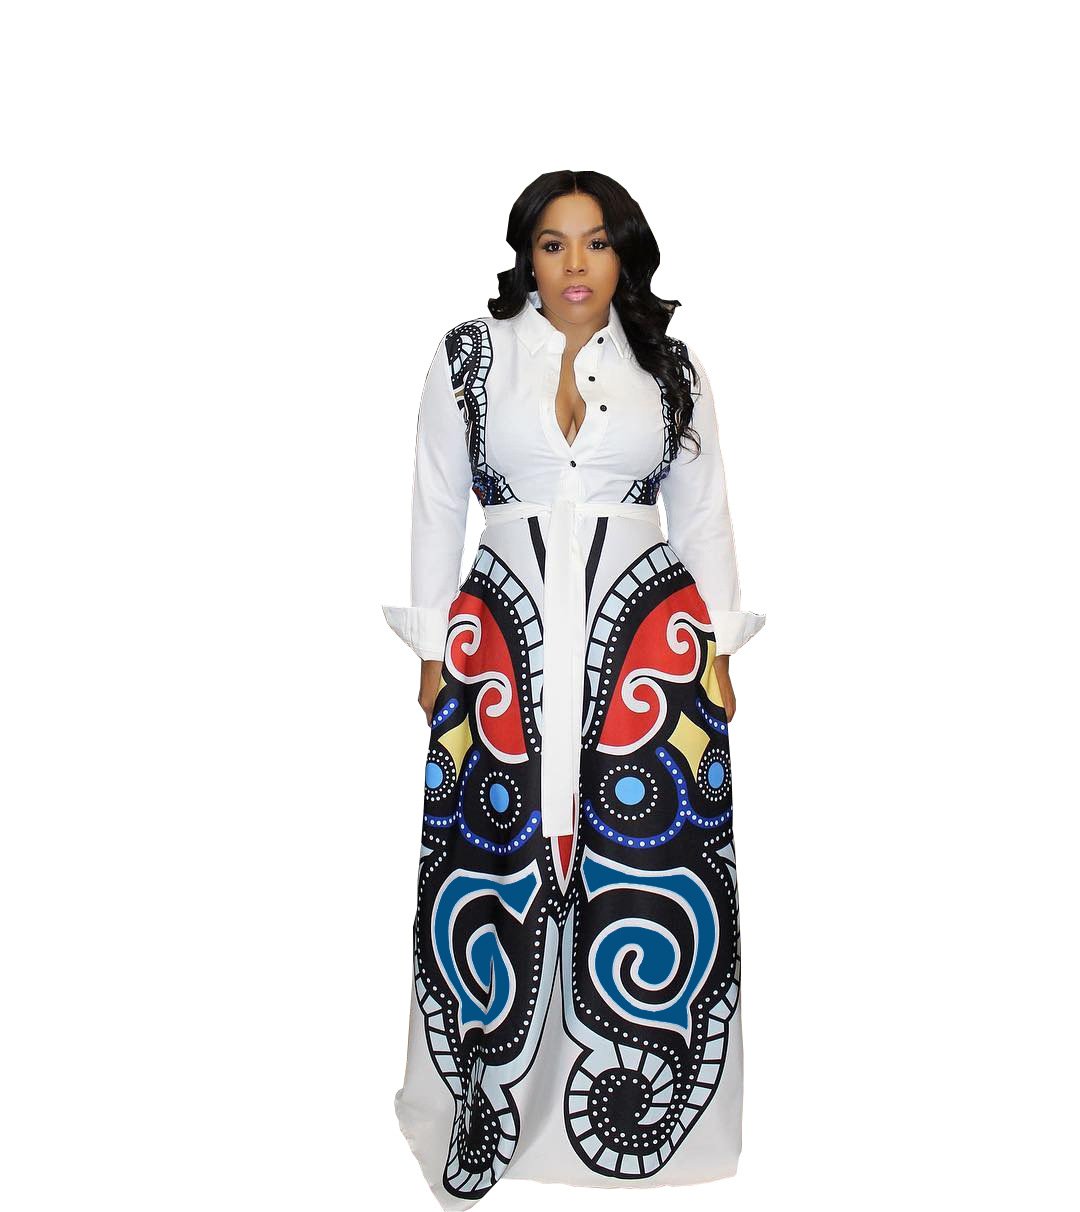 Women Maxi Dress Long Sleeve Butterfly Printed Casual Streetwear Party African Dress off white